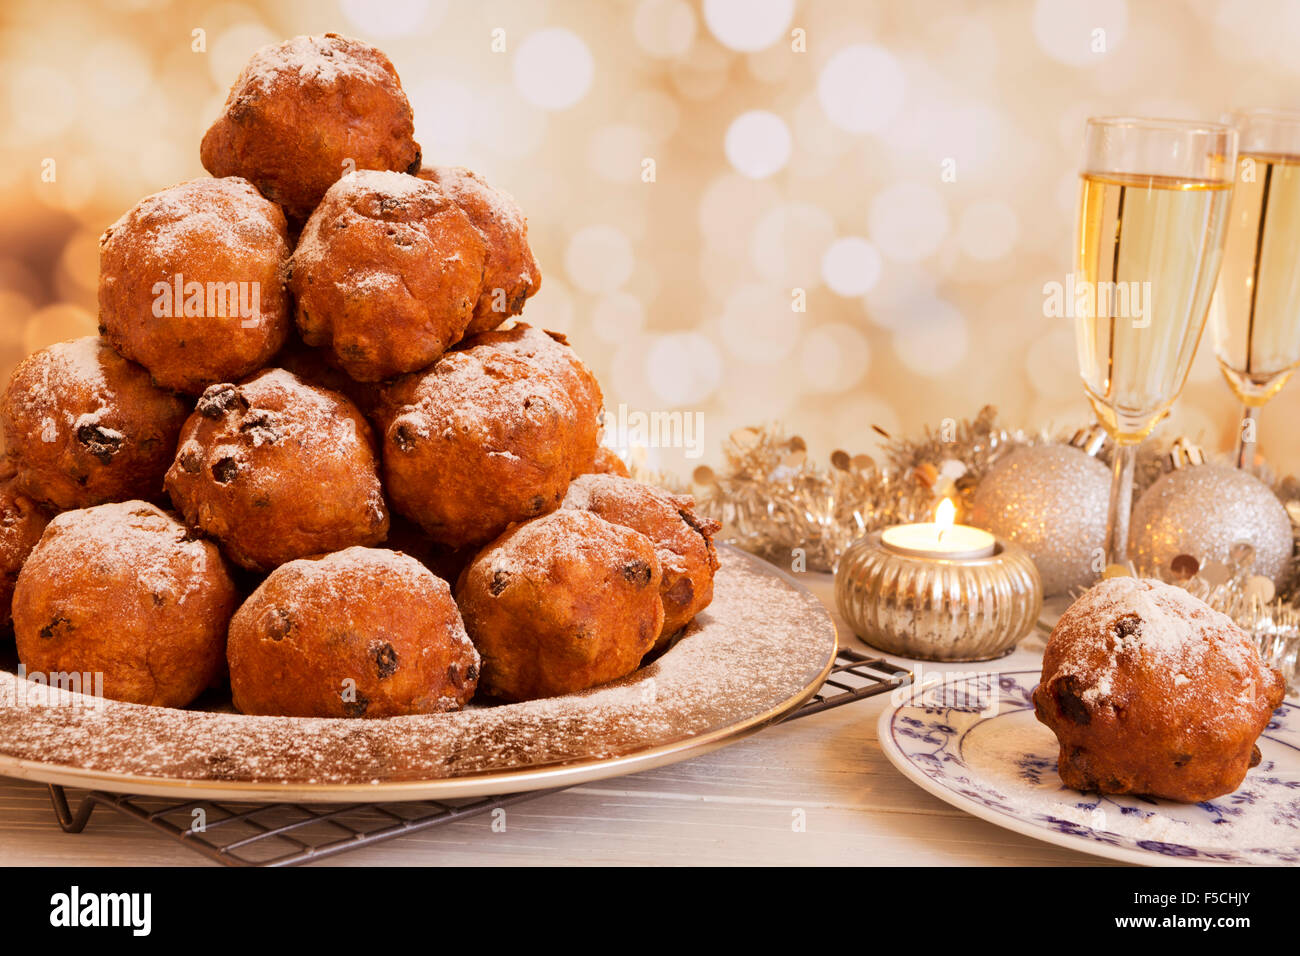 Champagne and 'Oliebollen', traditional Dutch pastry for New Year's Eve. Stock Photo